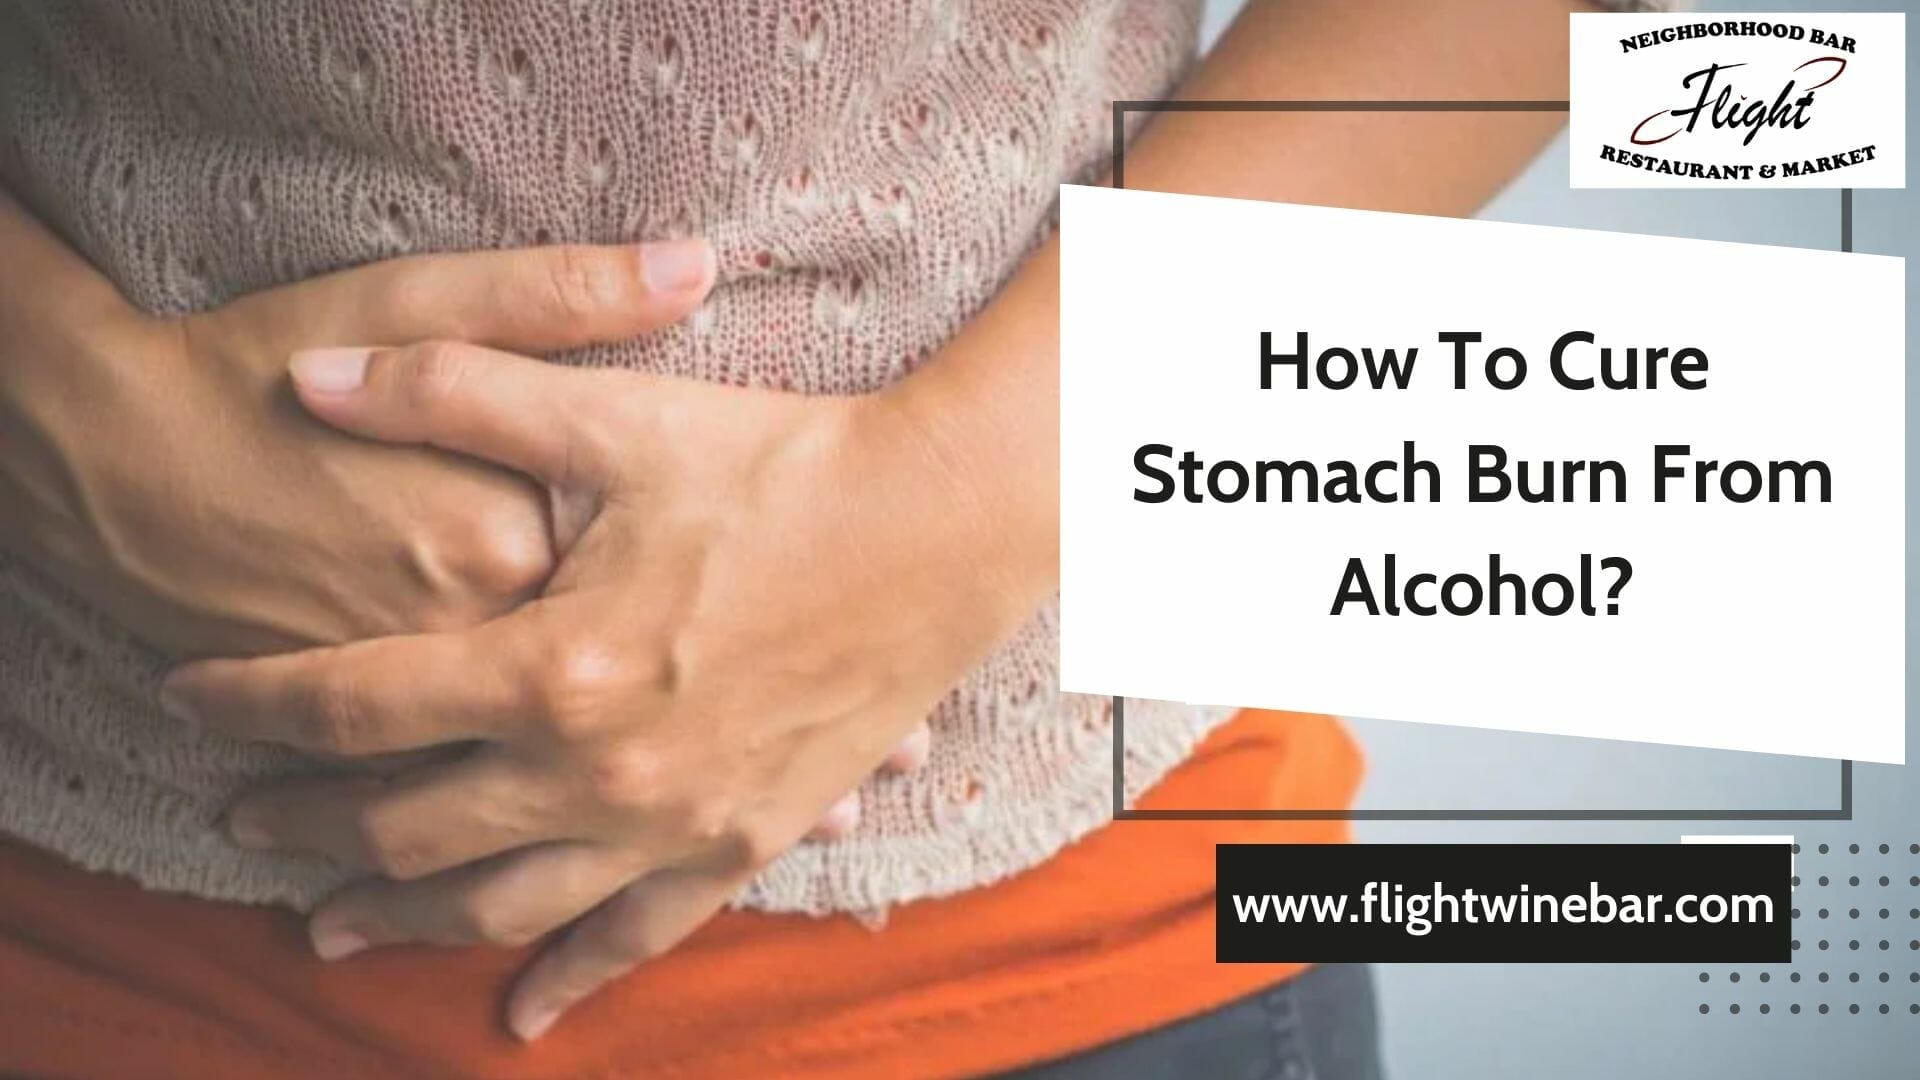 How To Cure Stomach Burn From Alcohol